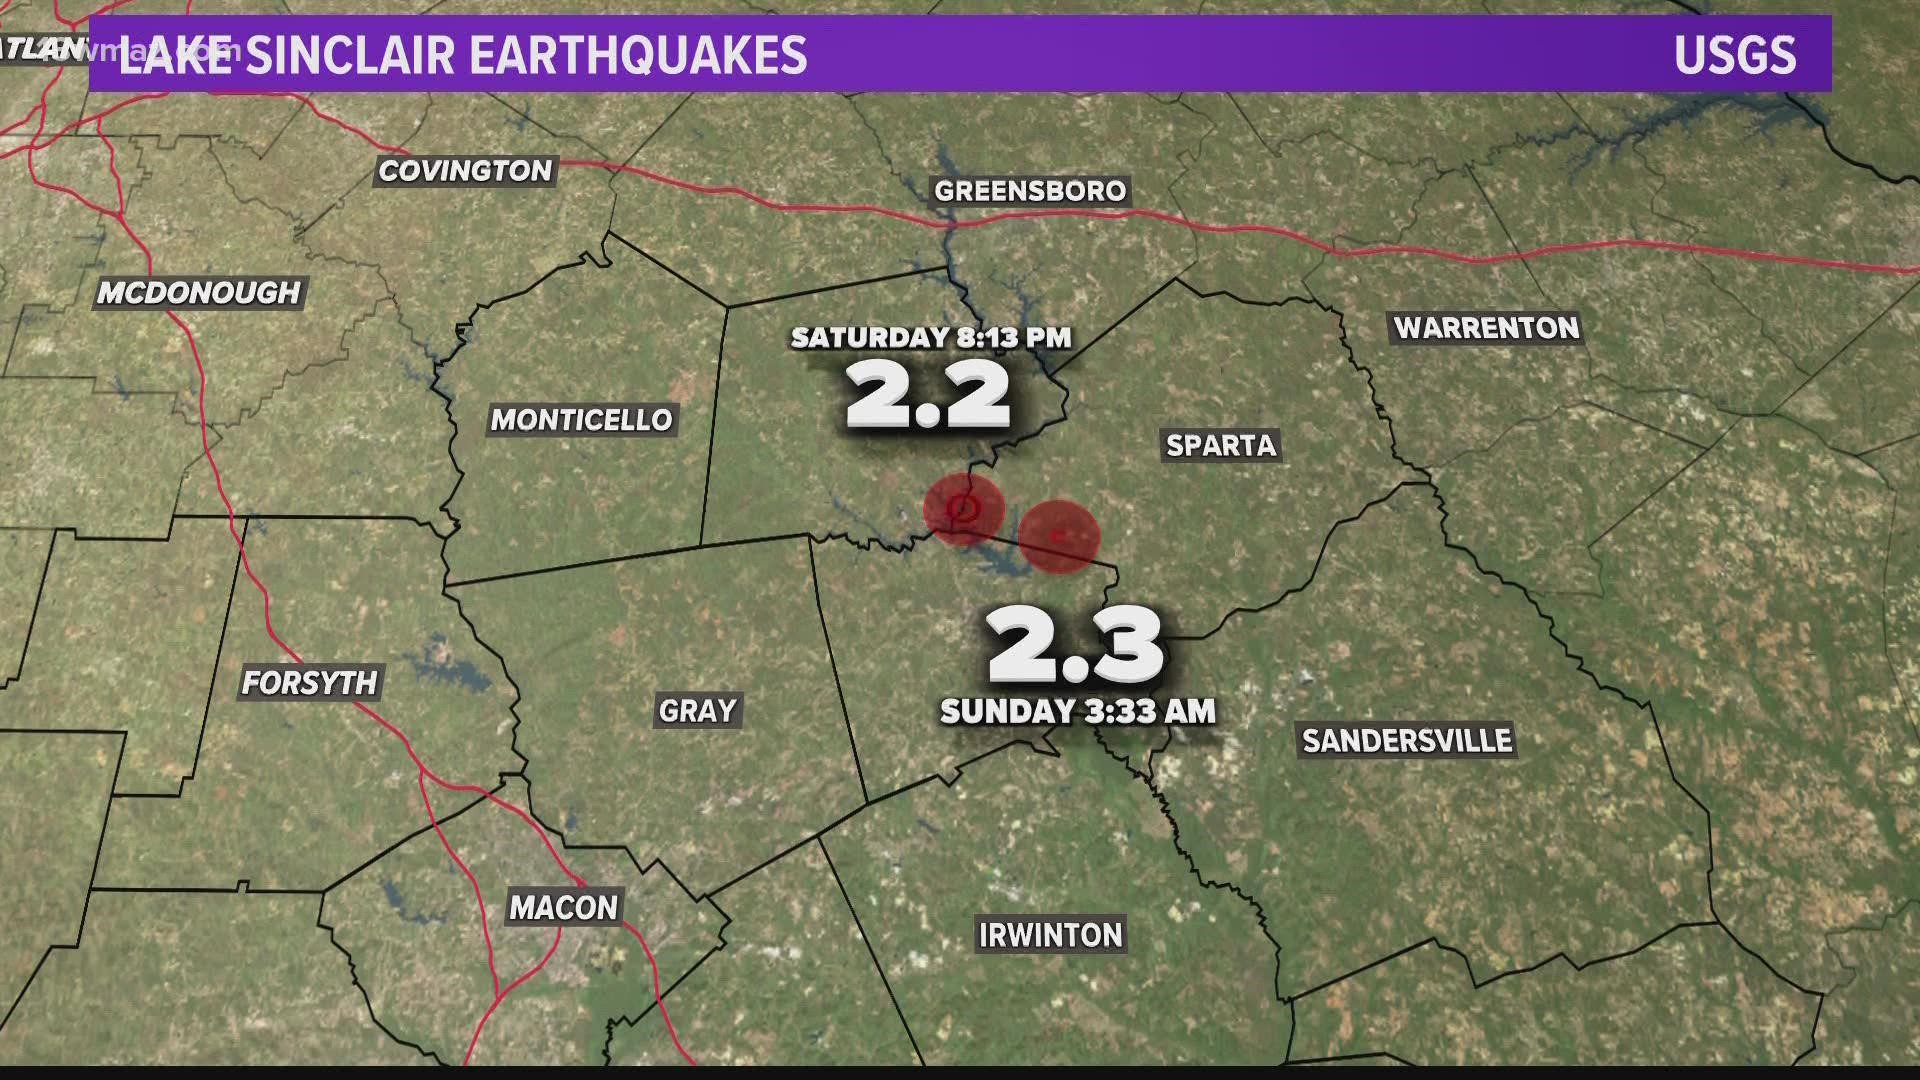 Quakes happen around Lake Sinclair and Oconee from time to time.